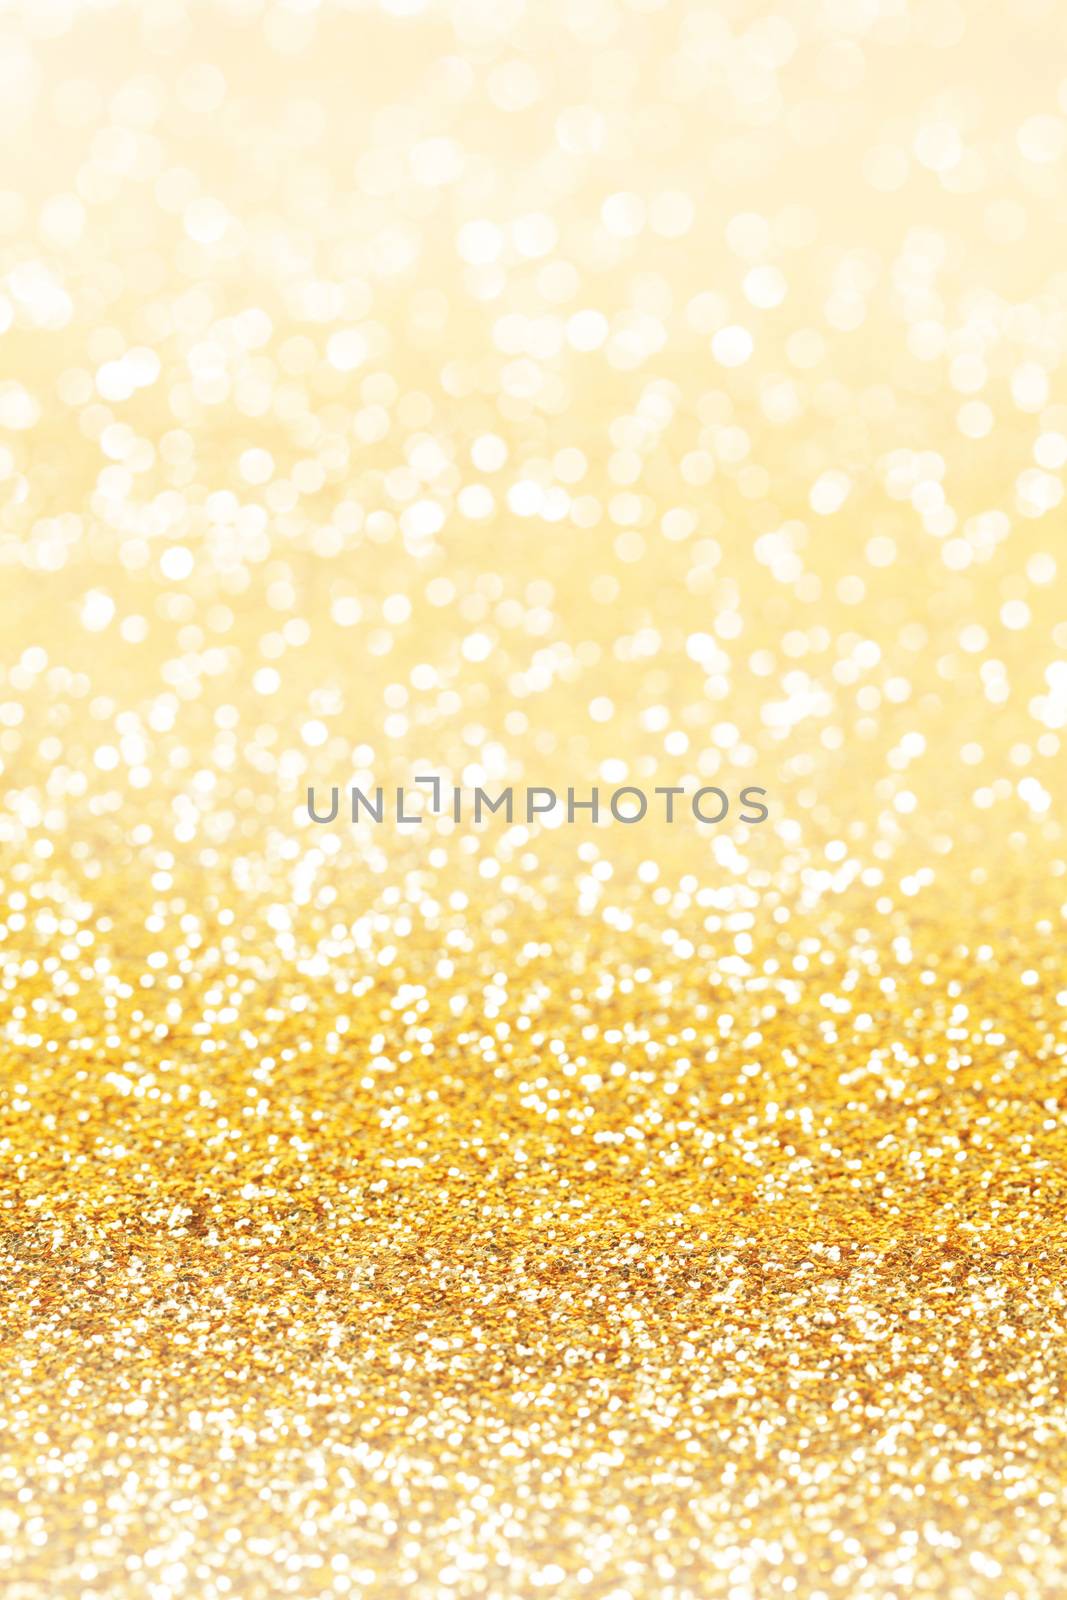 Abstract shining glitters gold holiday bokeh background